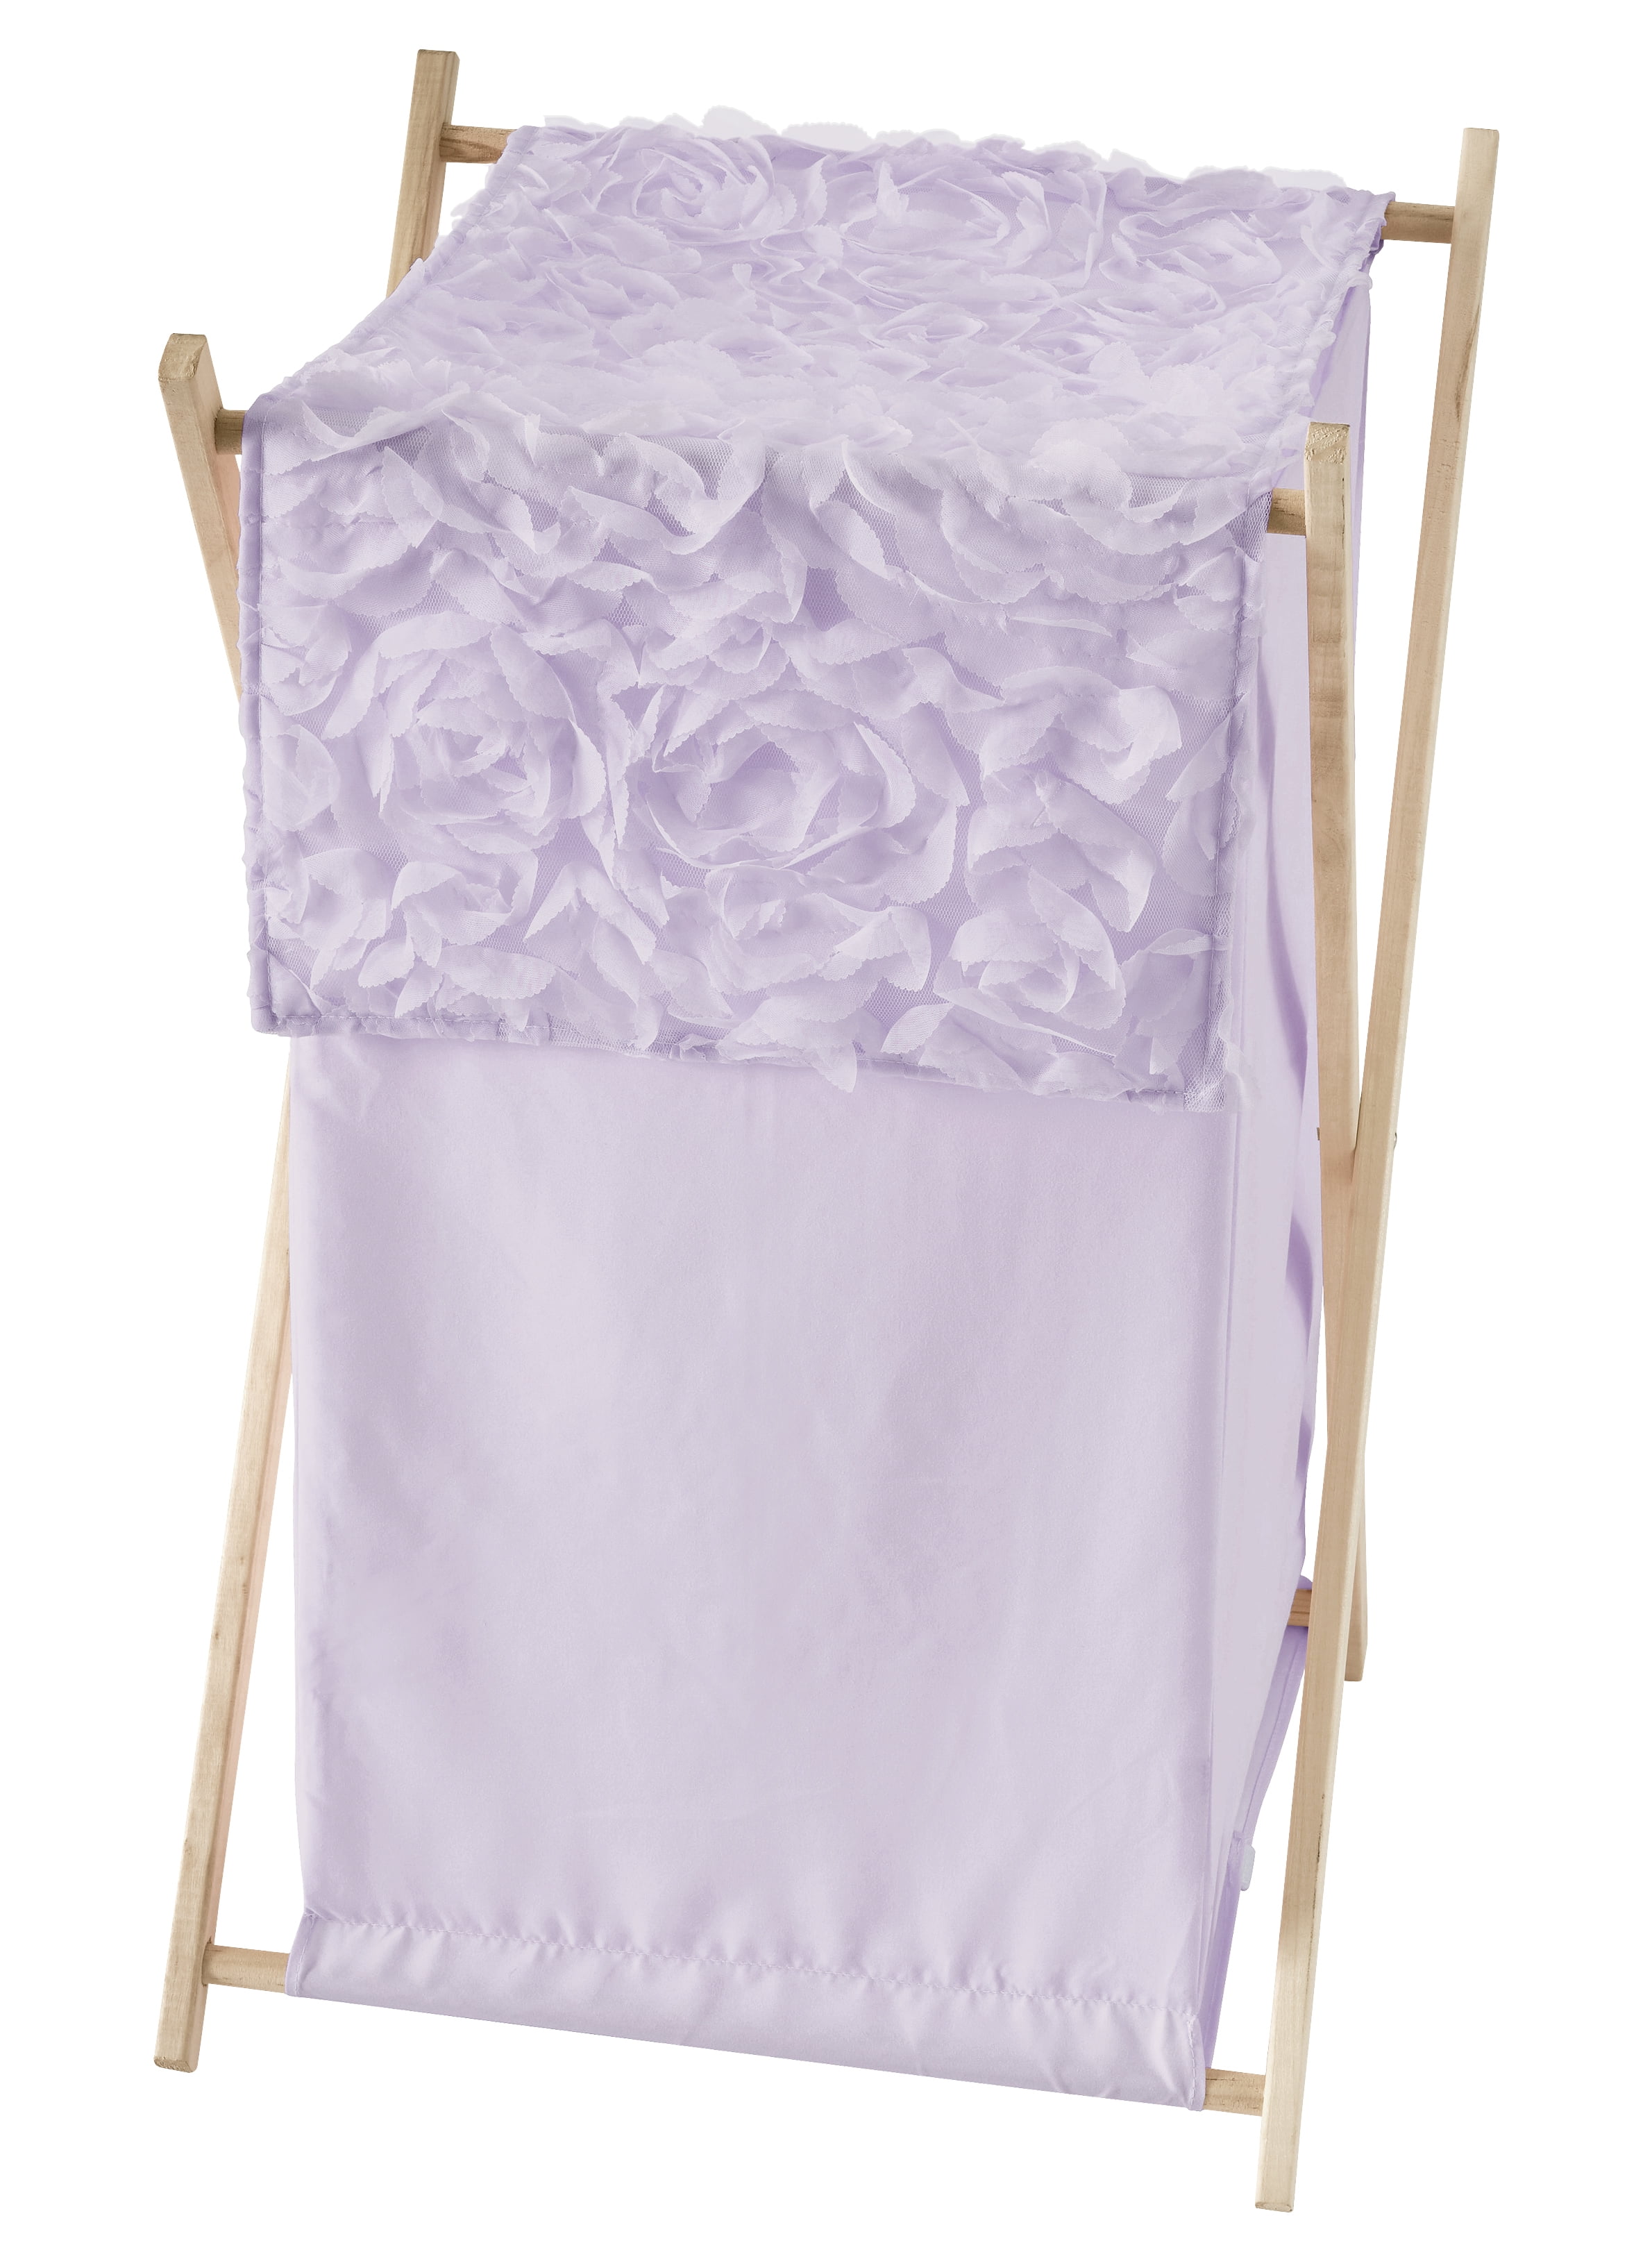 Grey Rose Flower Watercolor Floral Baby Kid Clothes Laundry Hamper by Sweet Jojo 